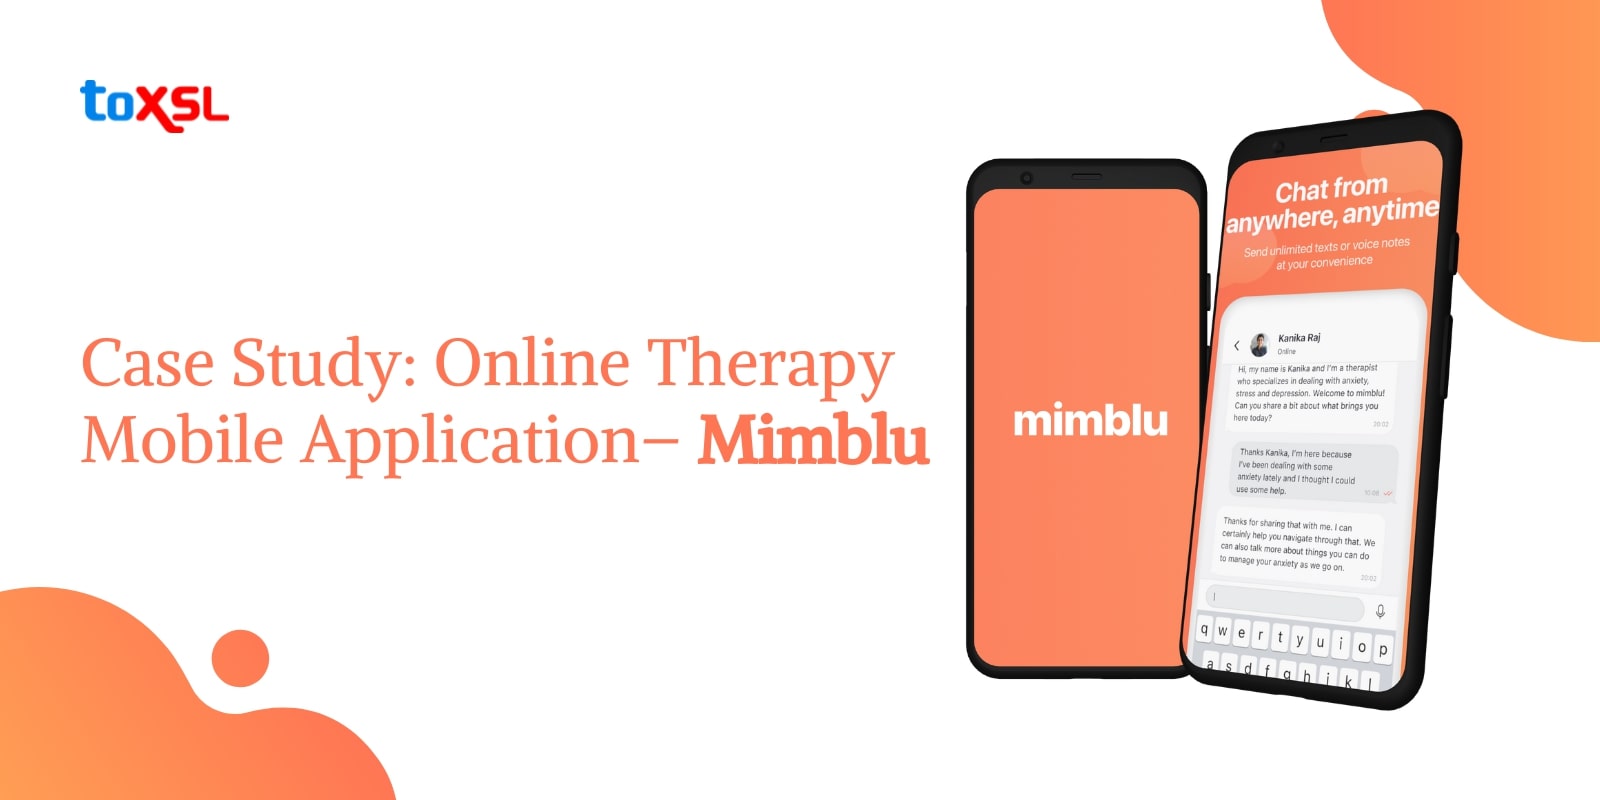 Case Study: Online Therapy Mobile Application By ToXSL – Mimblu